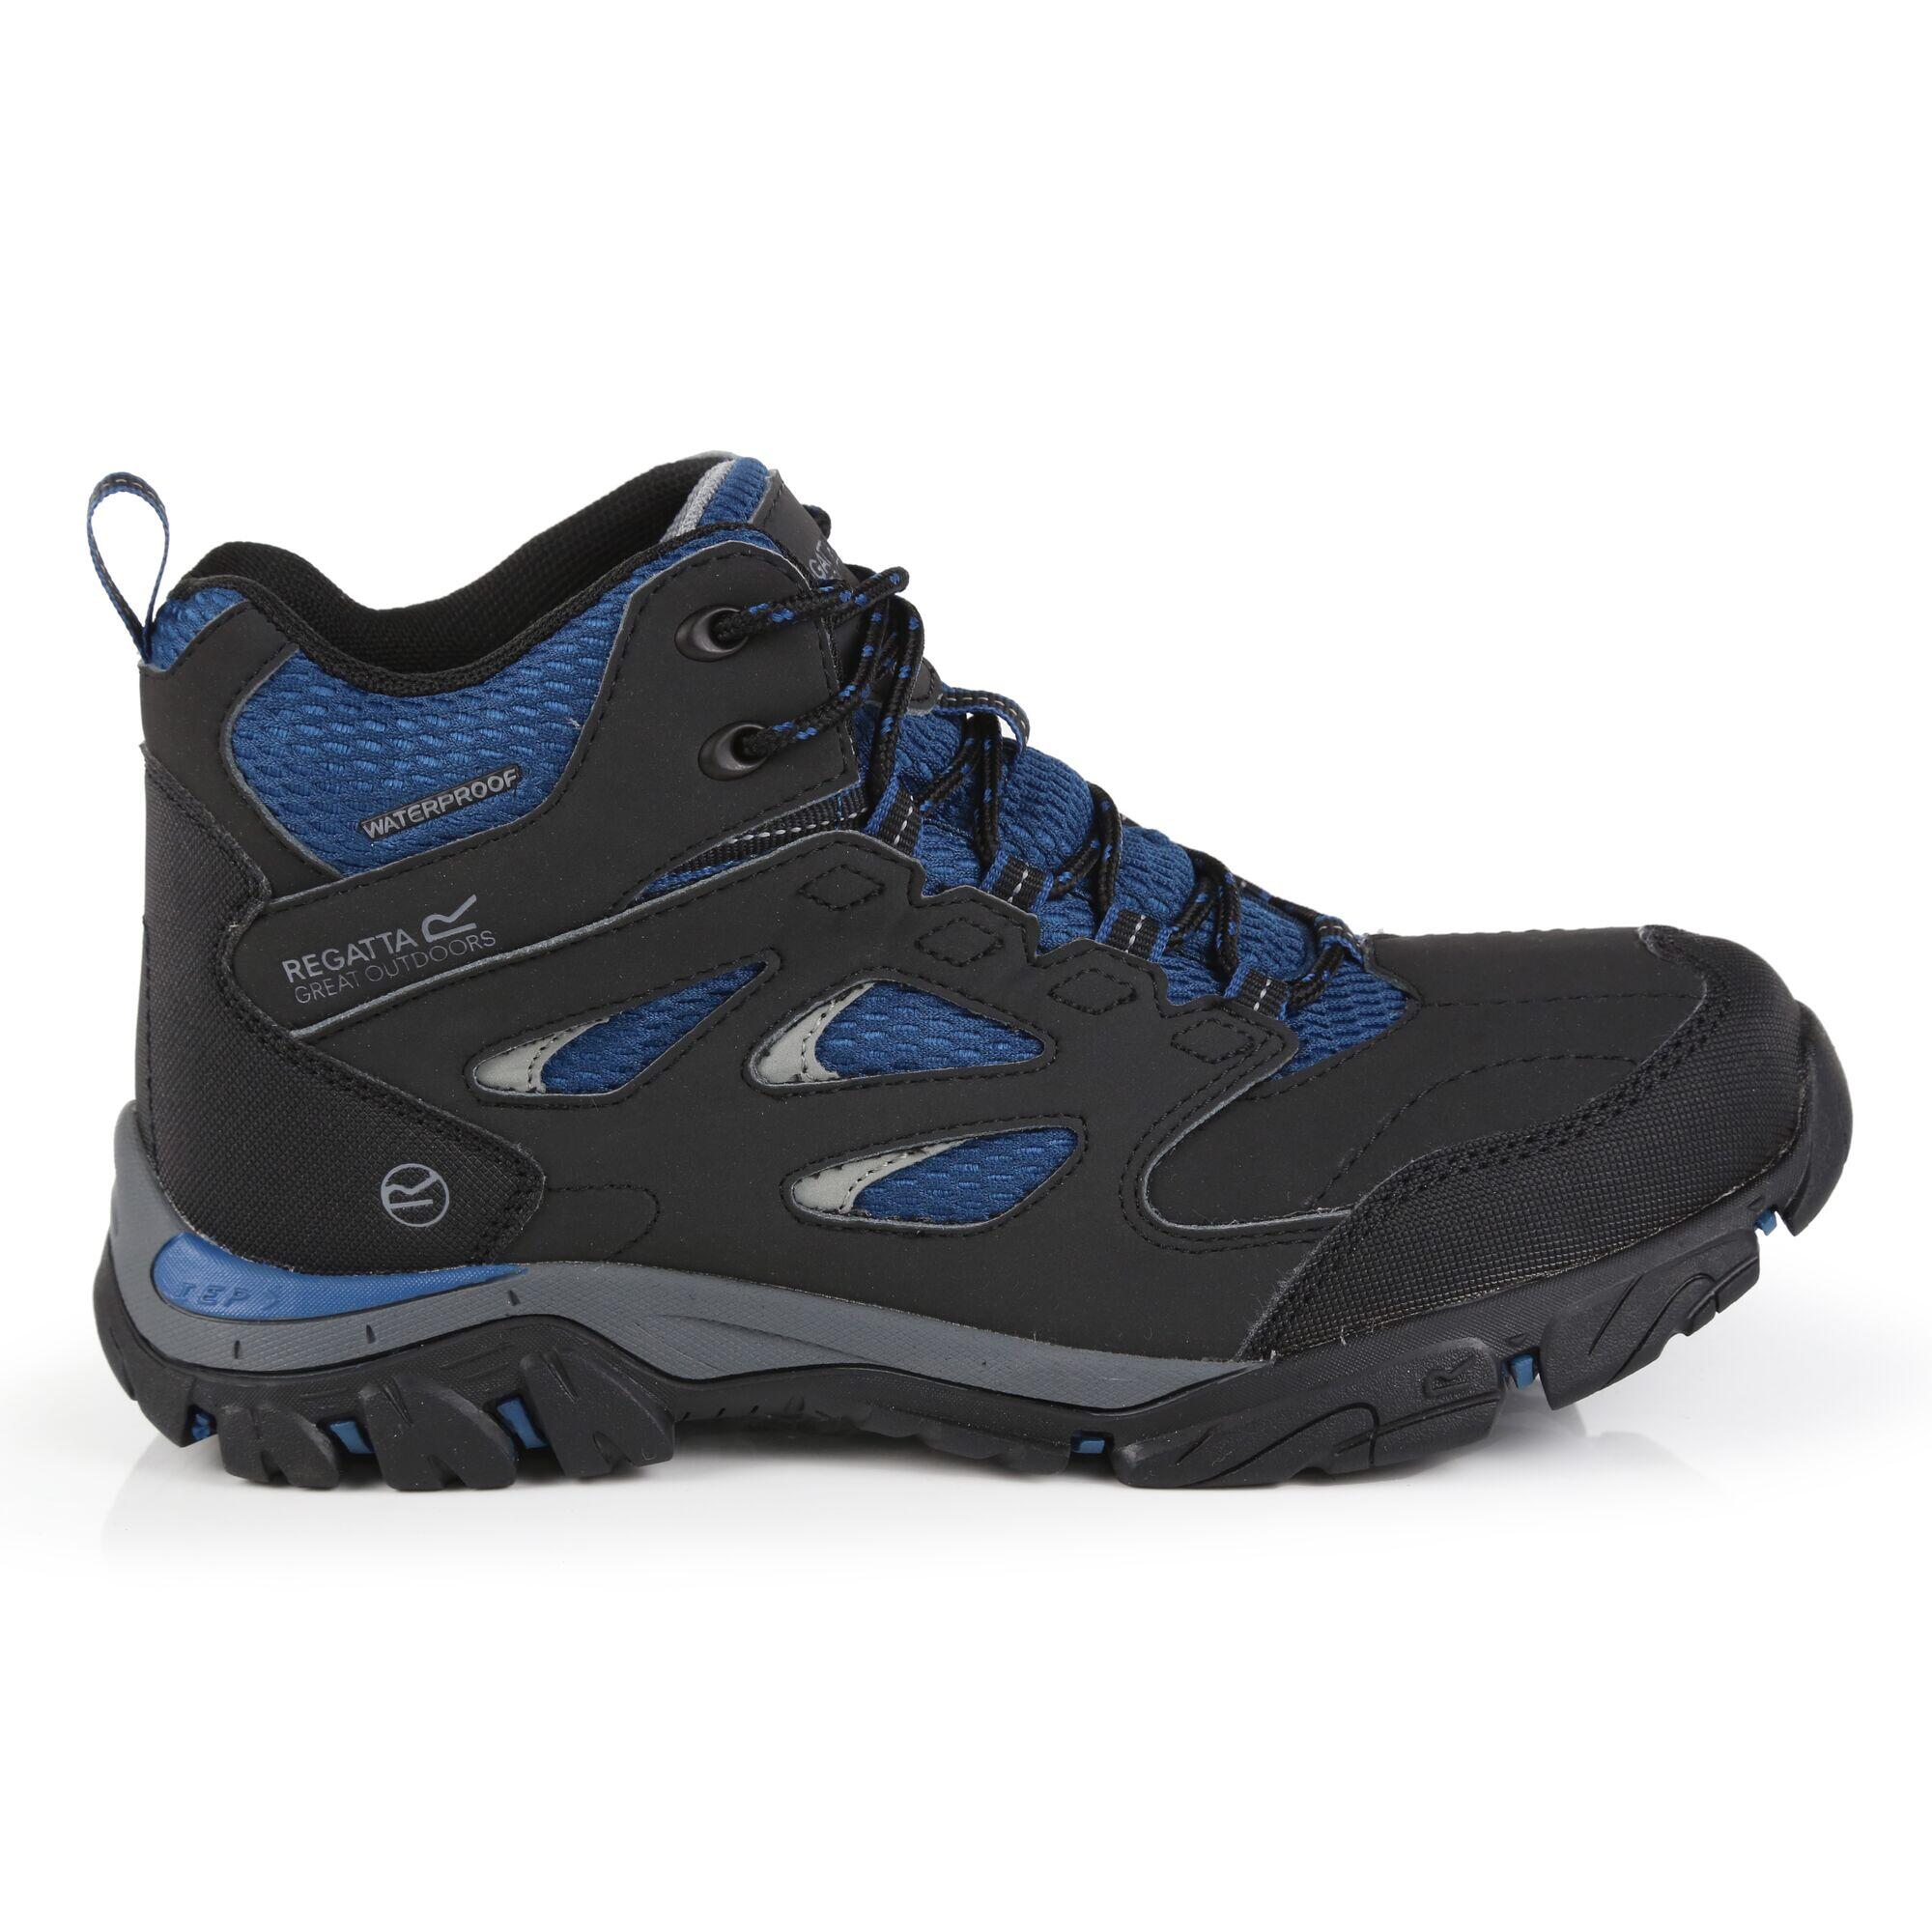 Lady Holcombe IEP Mid Women's Hiking Boots - Ash Grey / Blue 1/5